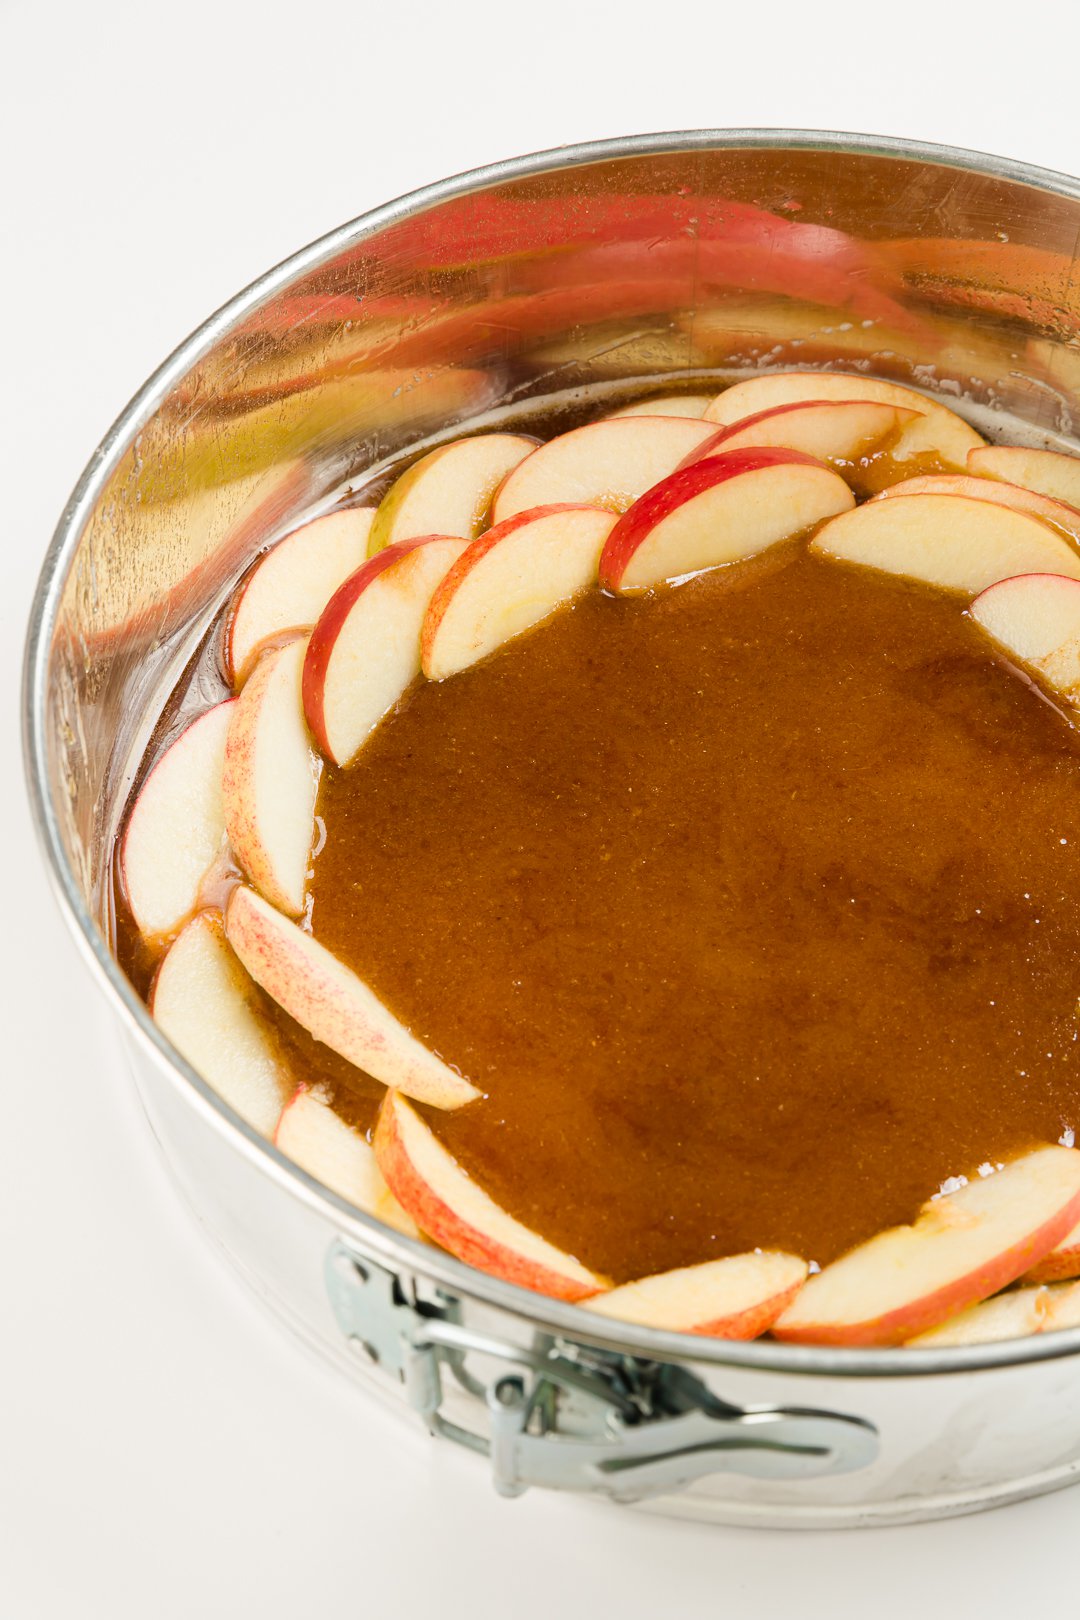 Apples arranged in a springform pan on top of caramel